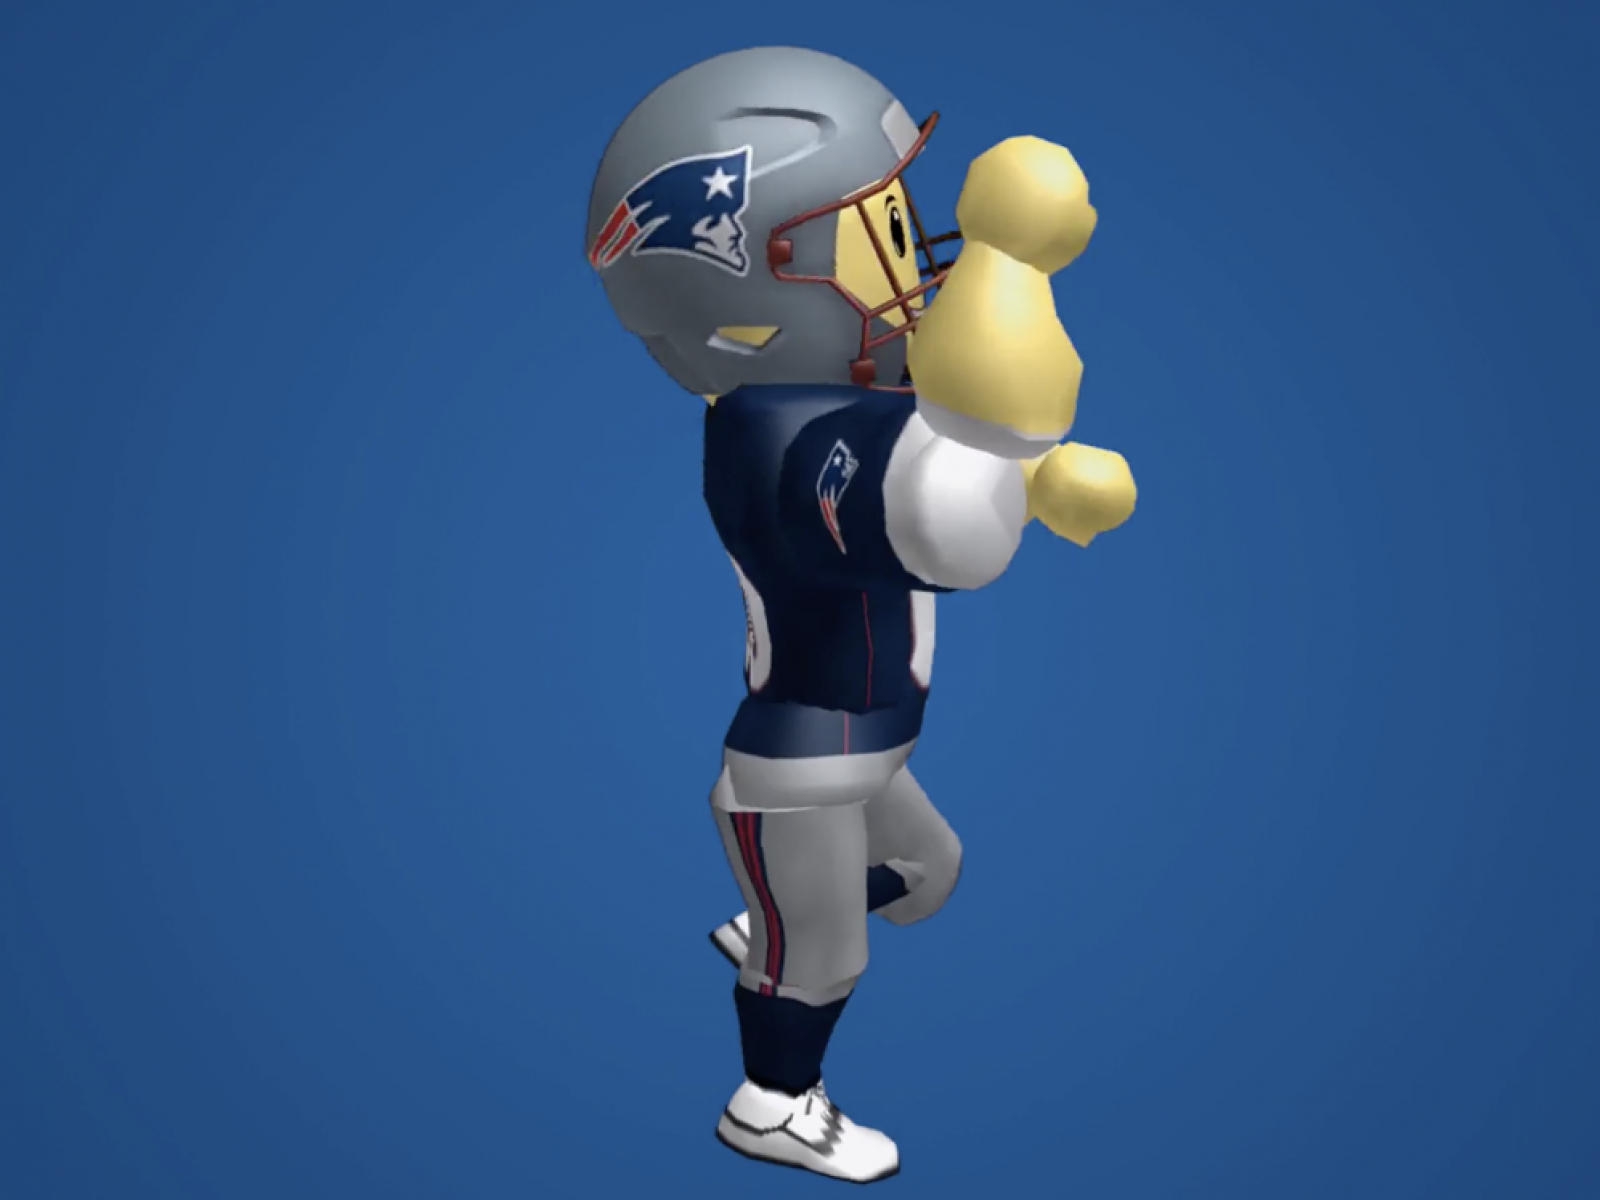 Roblox And Nfl Team Up To Give Players Free Team Helmets - roblox football stars cowboys id